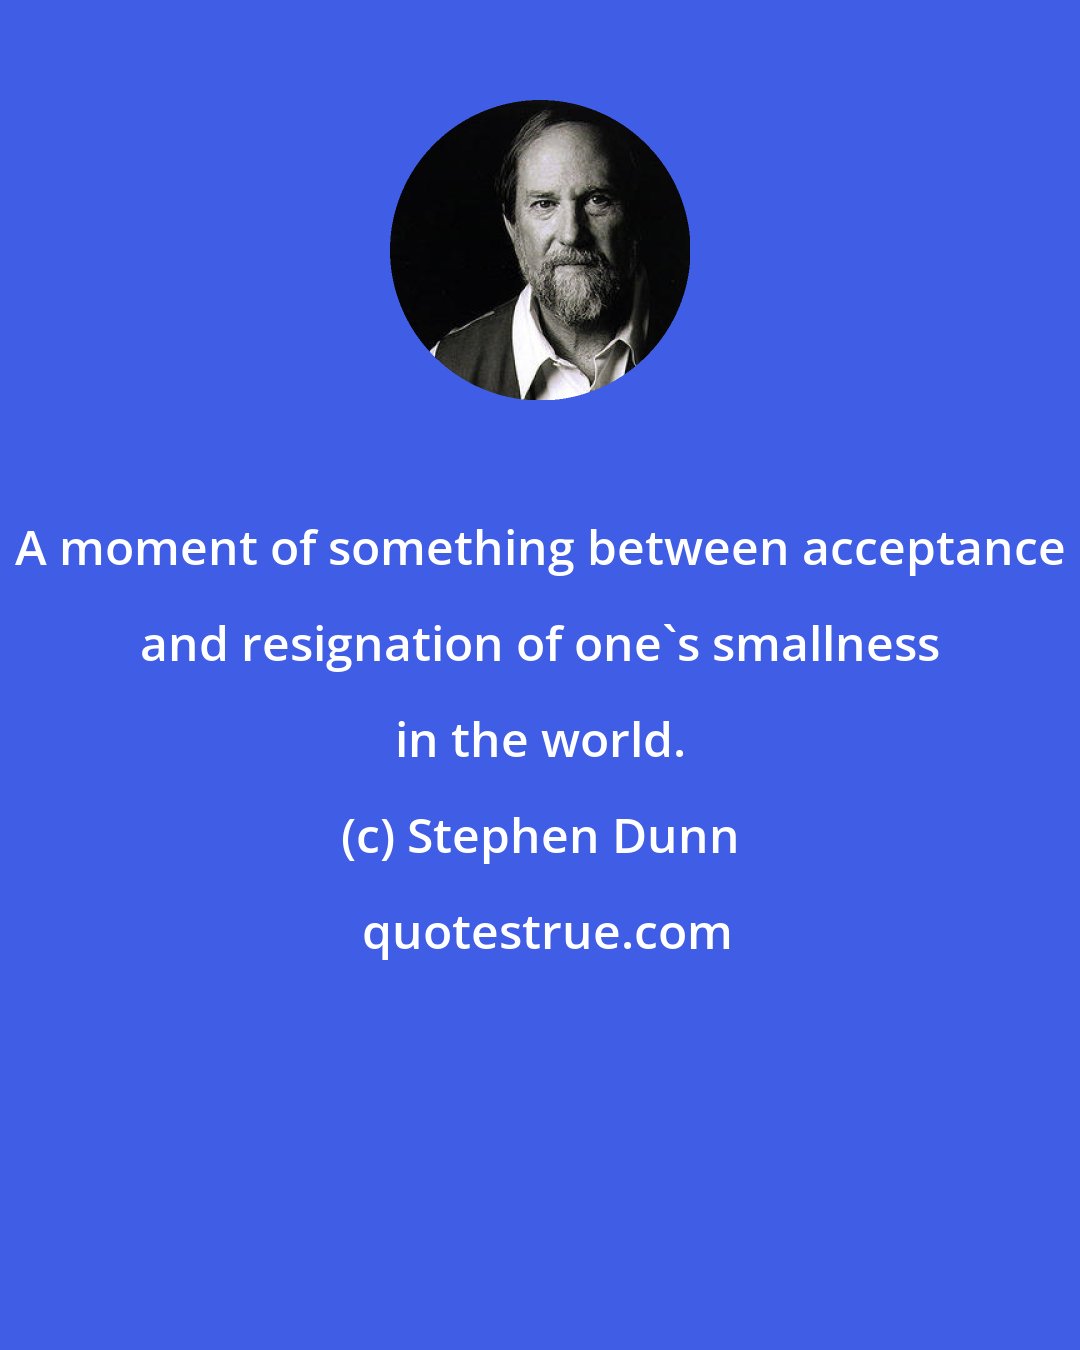 Stephen Dunn: A moment of something between acceptance and resignation of one's smallness in the world.